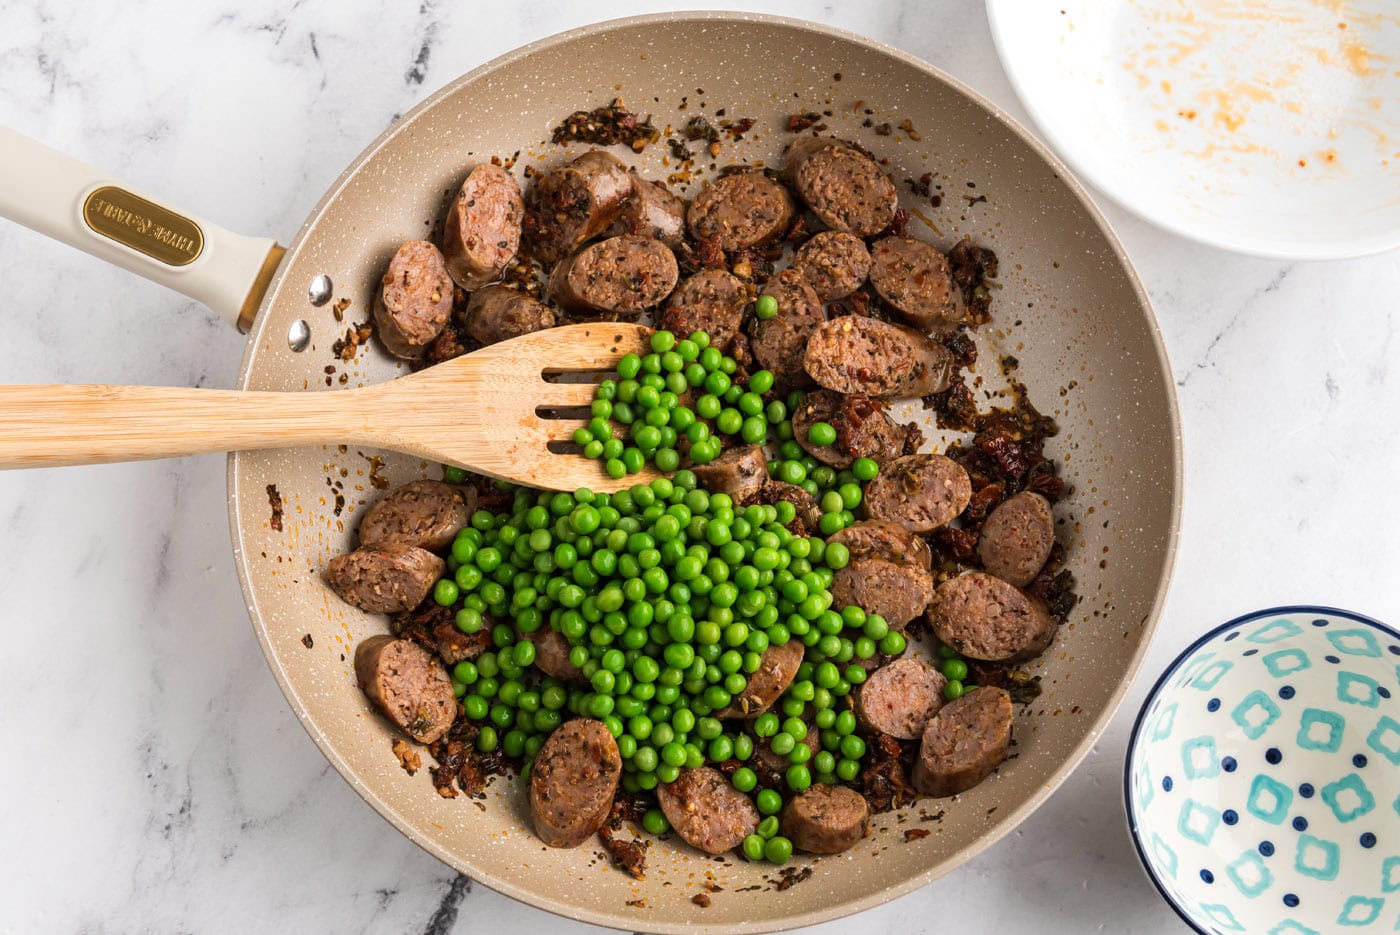 green peas added to Italian sausage and sun dried tomatoes in a skillet